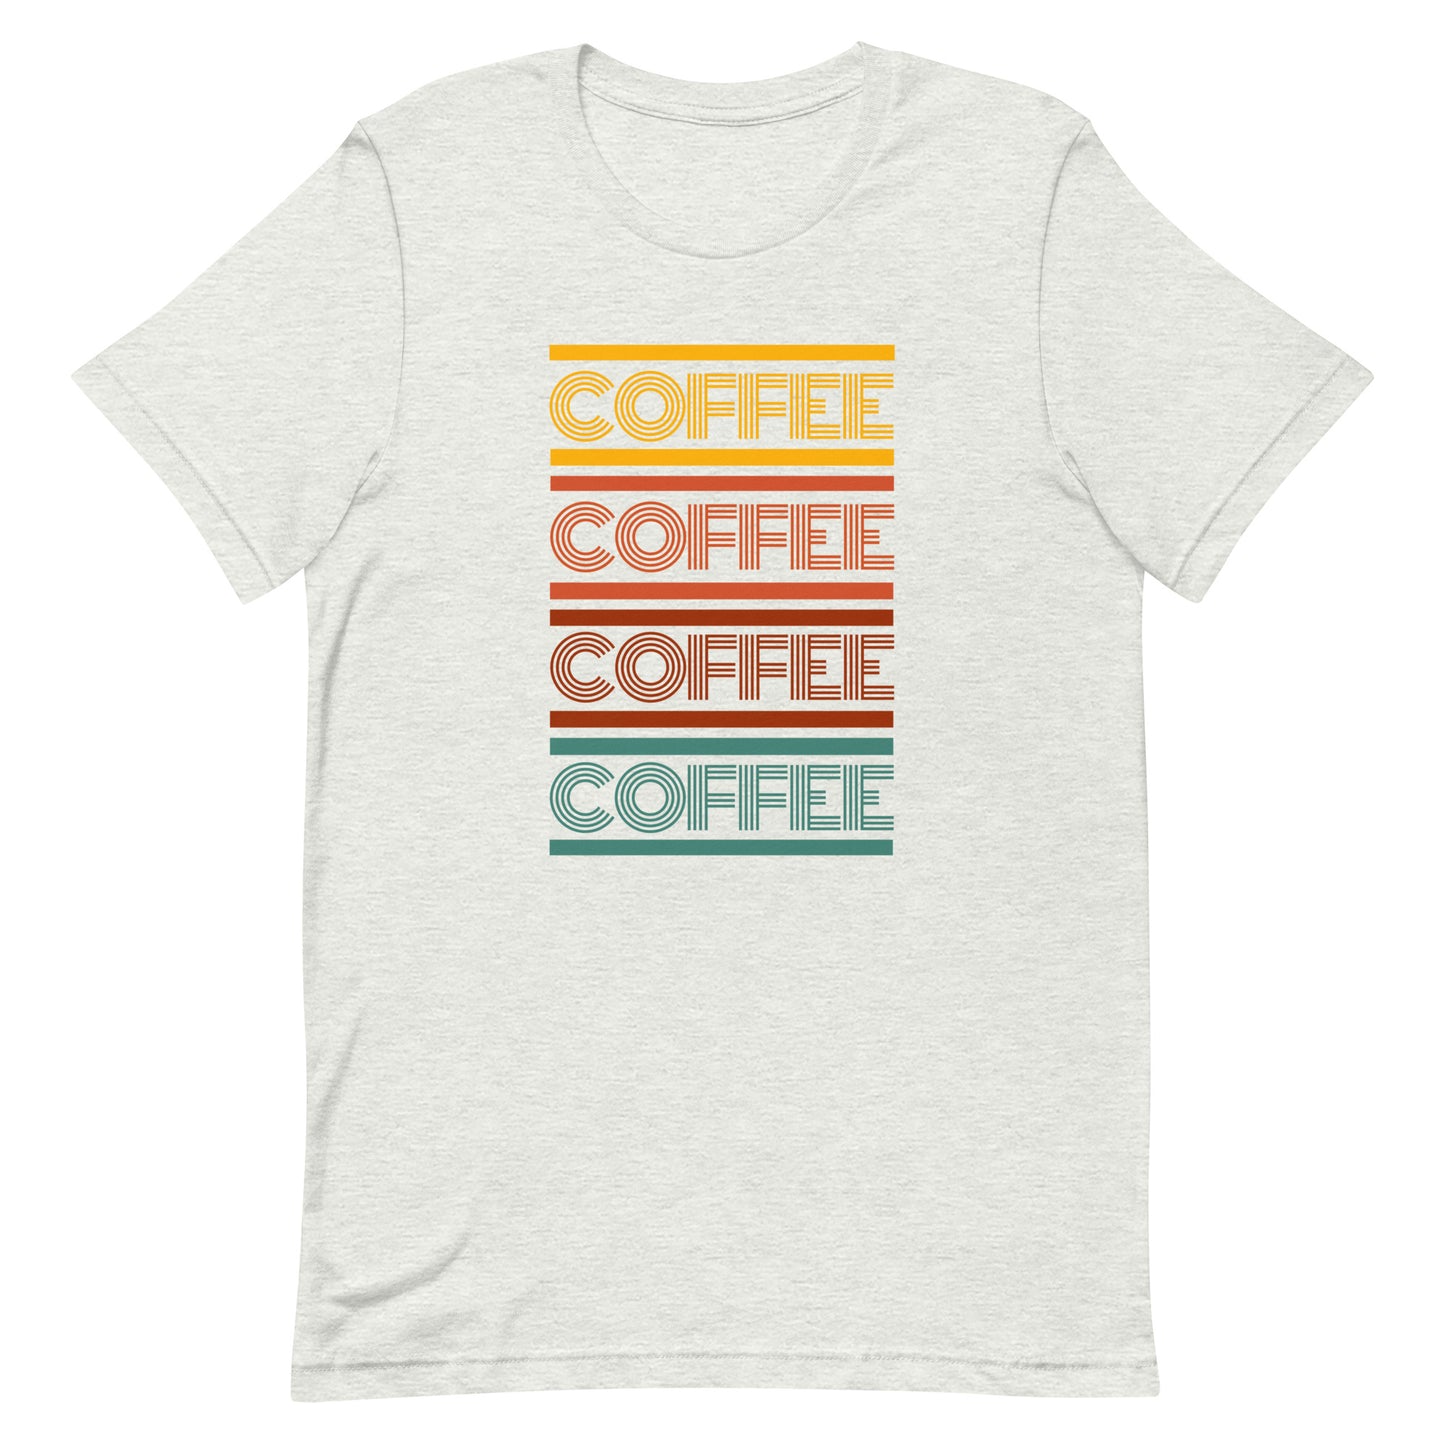 An ash colored coffee t-shirt that has the words coffee repeated in a retro inspired font.